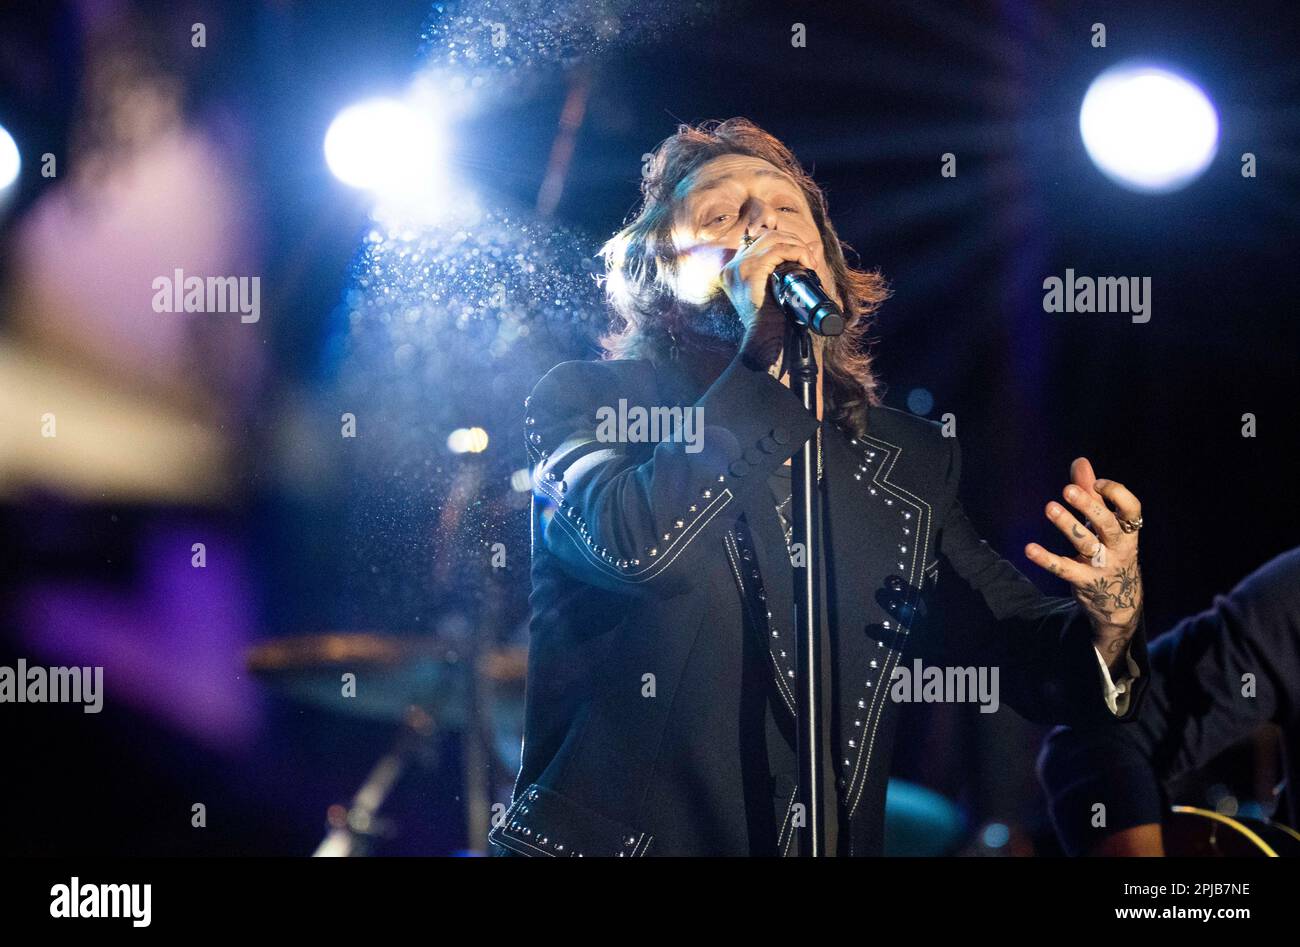 Austin Texas USA, March 31, 2023: Lead singer of rock & roll band The Black Crowes, CHRIS ROBINSON, sings onstage during a taping of Country Music Television's (CMT) Crossroads on an outdoor stage downtown. Credit: Bob Daemmrich/Alamy Live News Stock Photo